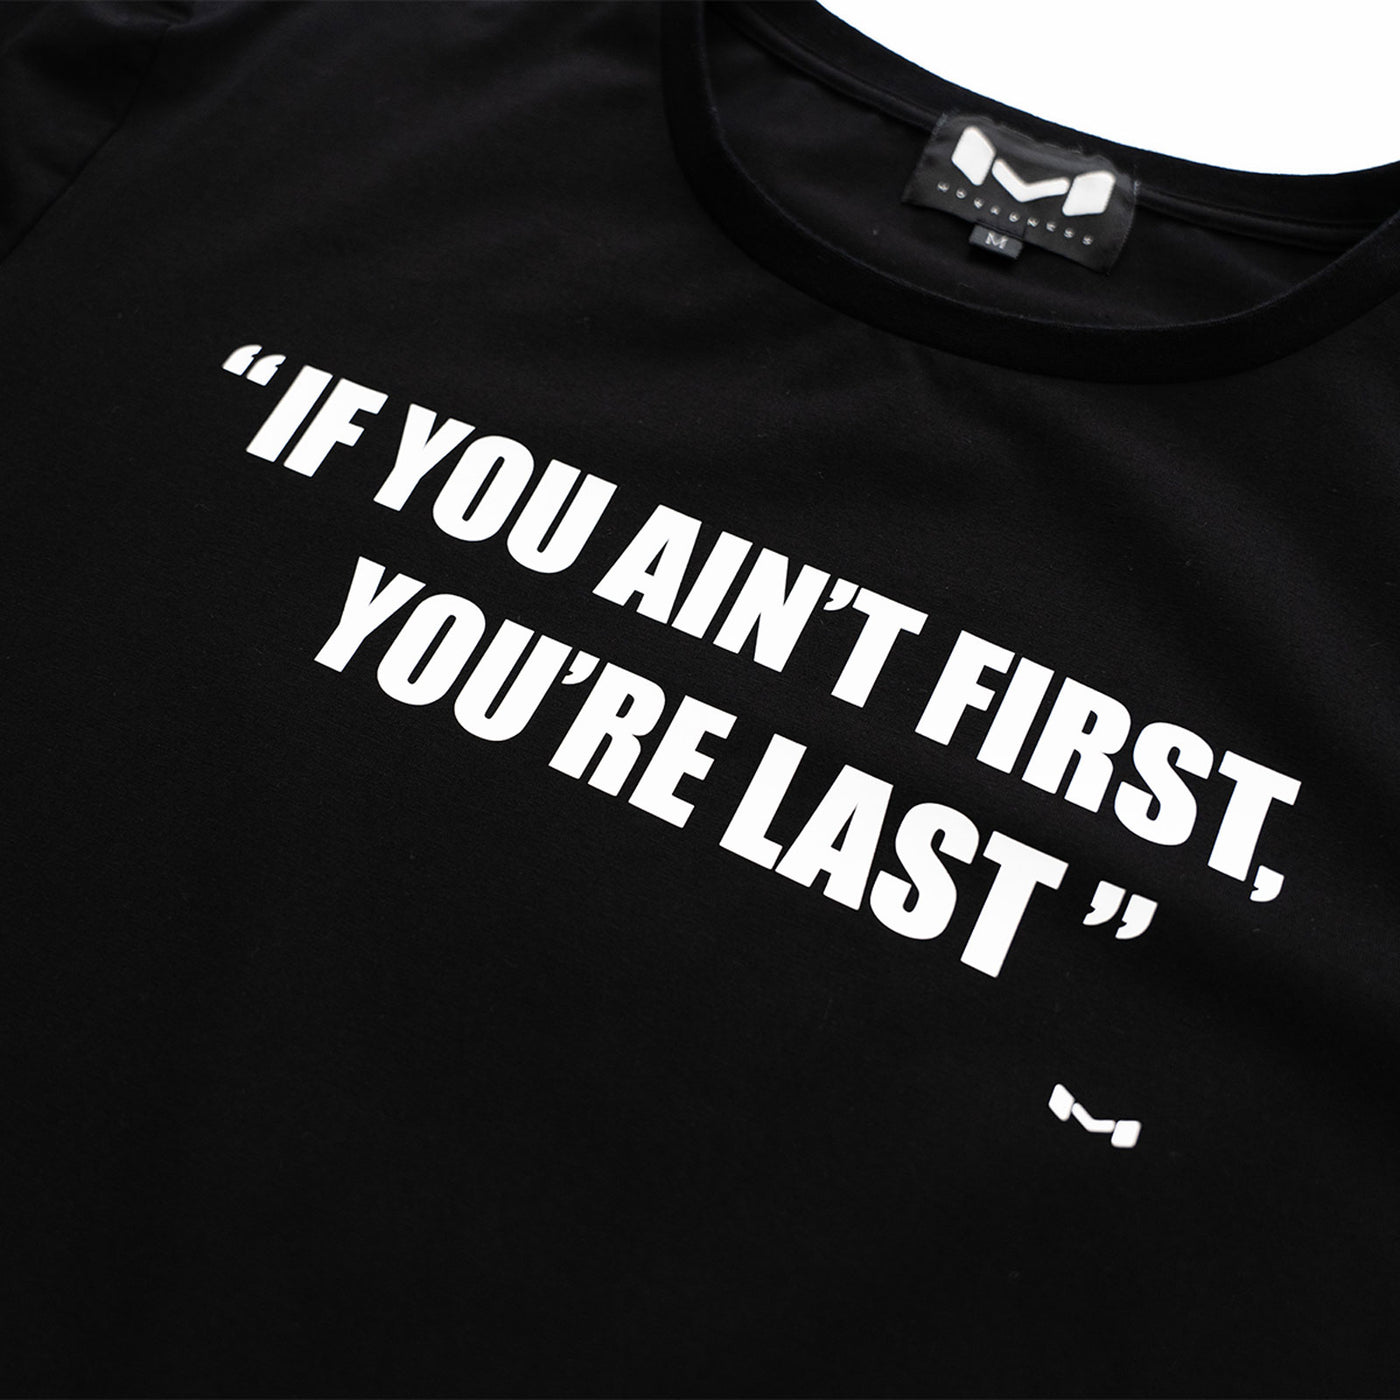 First/Last "Quote" T-Shirt